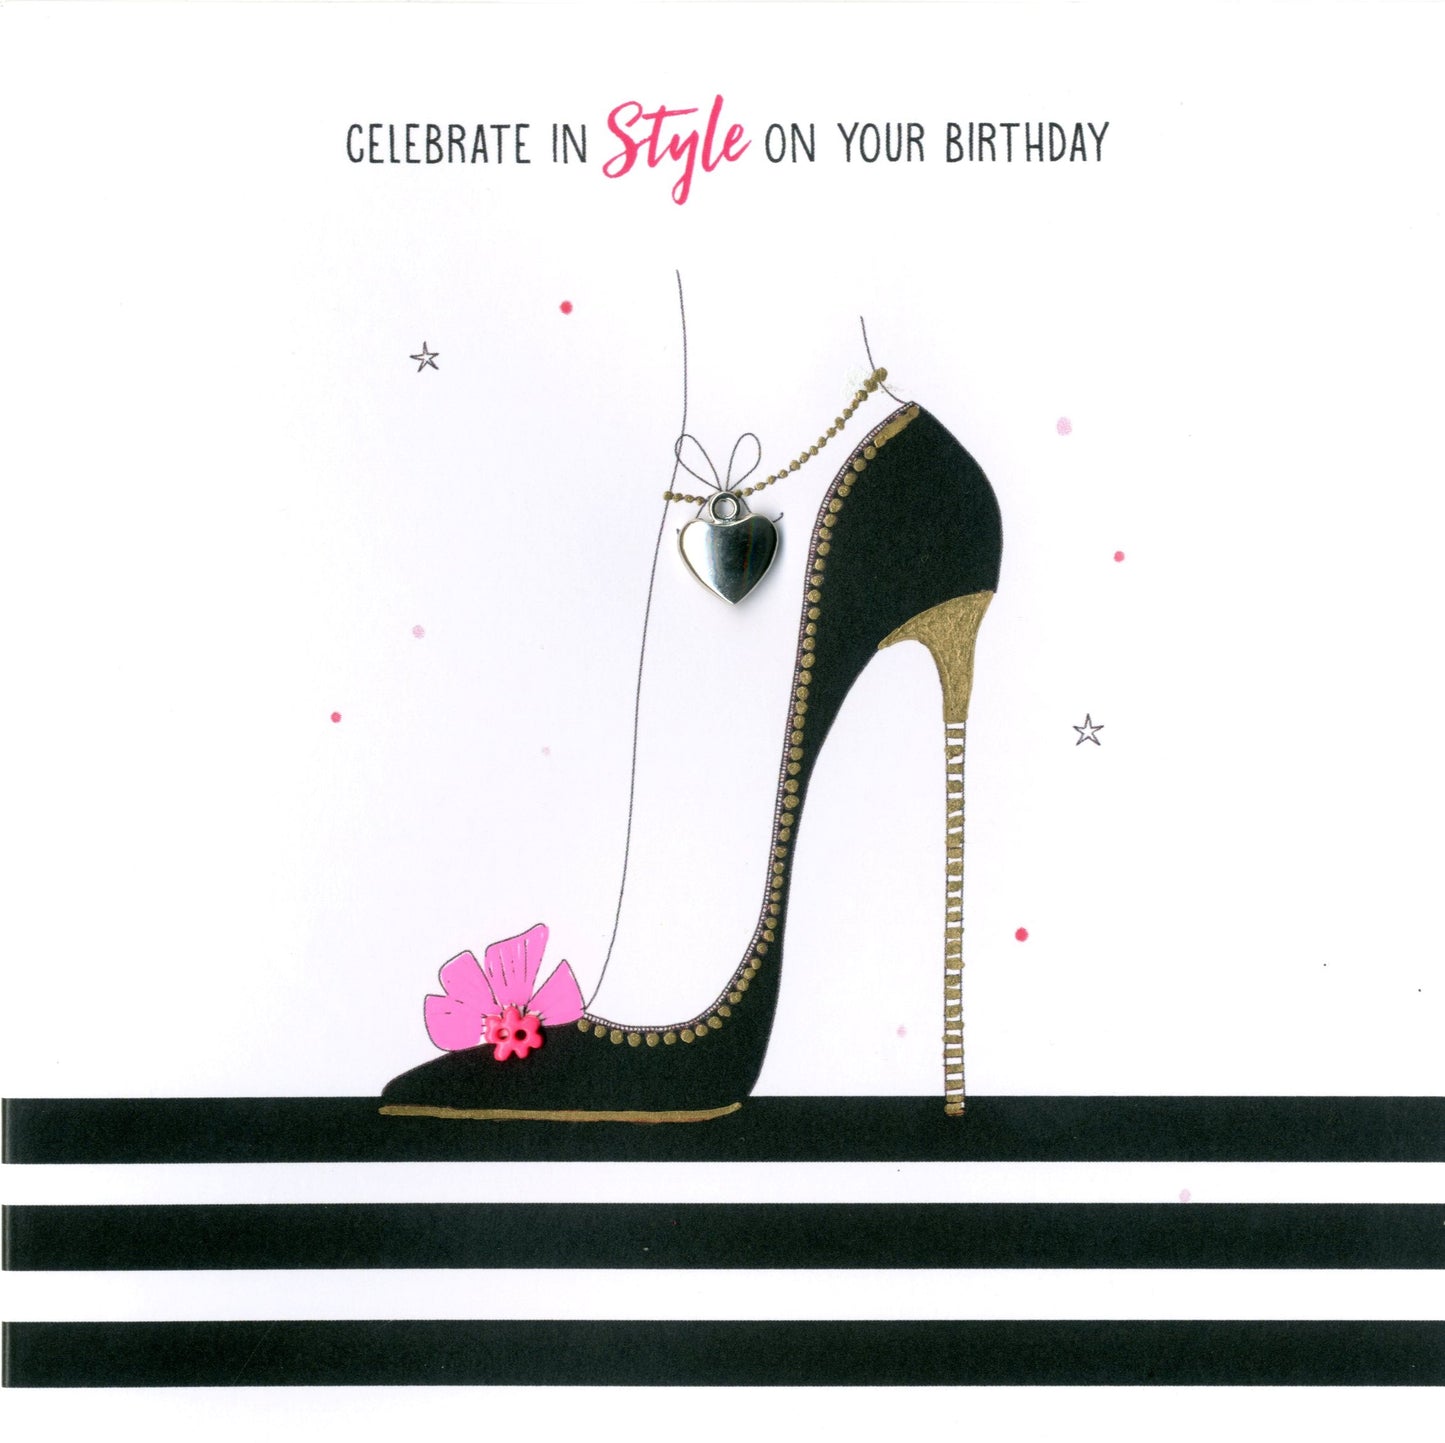 Hand-Finished Stiletto Shoes Birthday Greeting Card